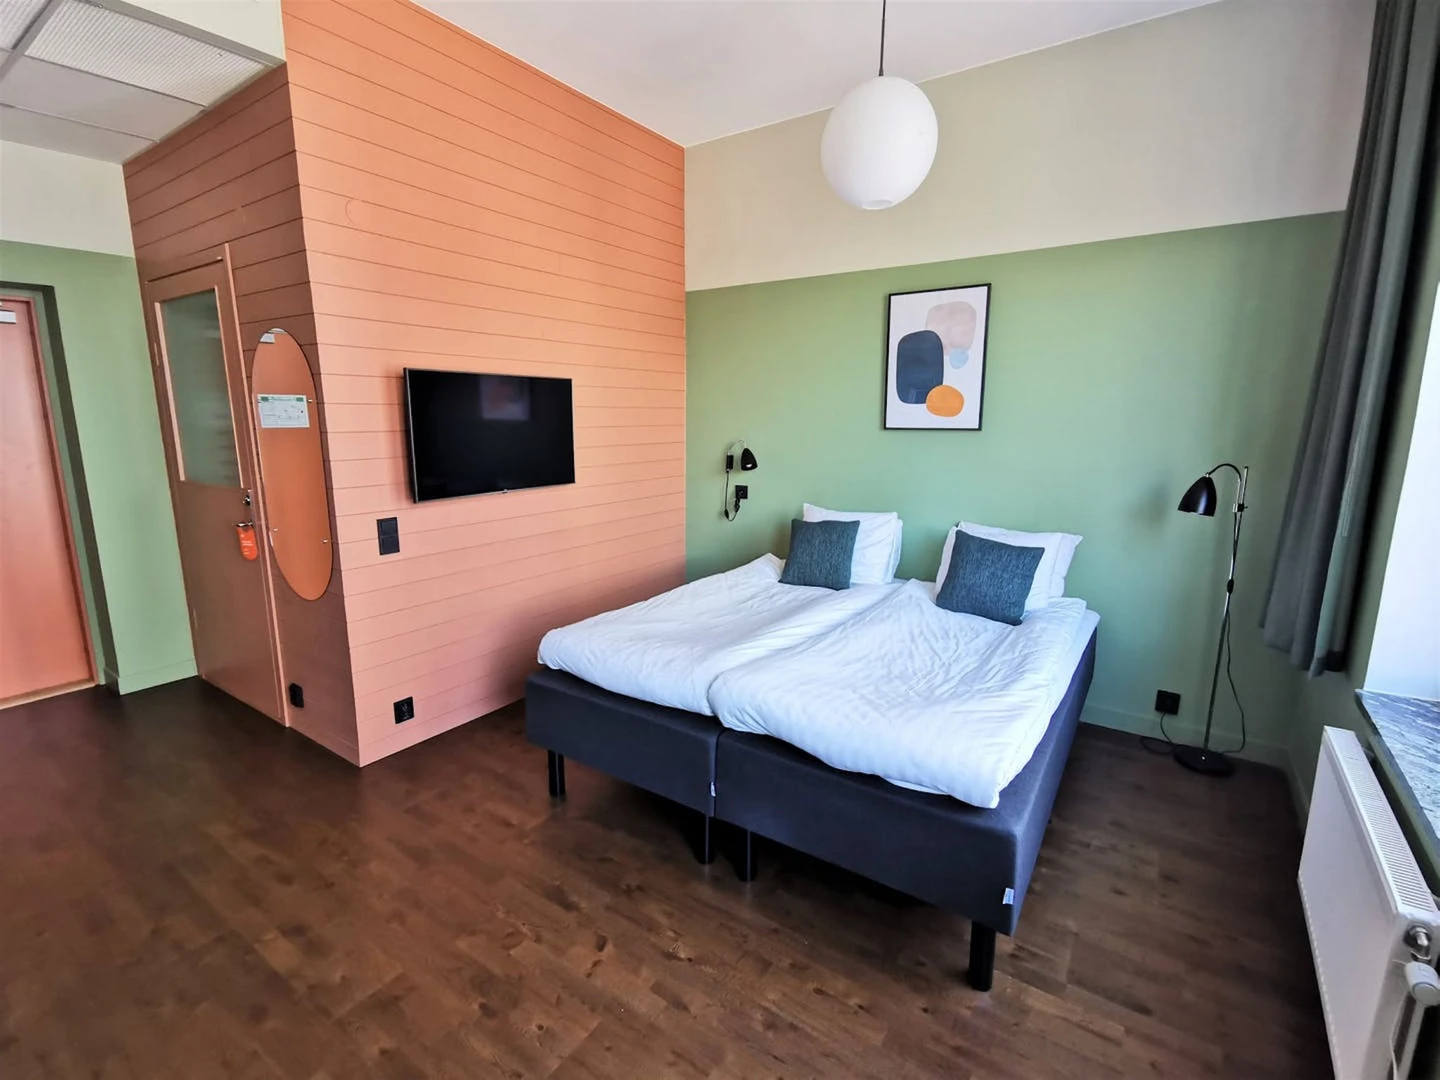 Accommodation in the centre of Malmo